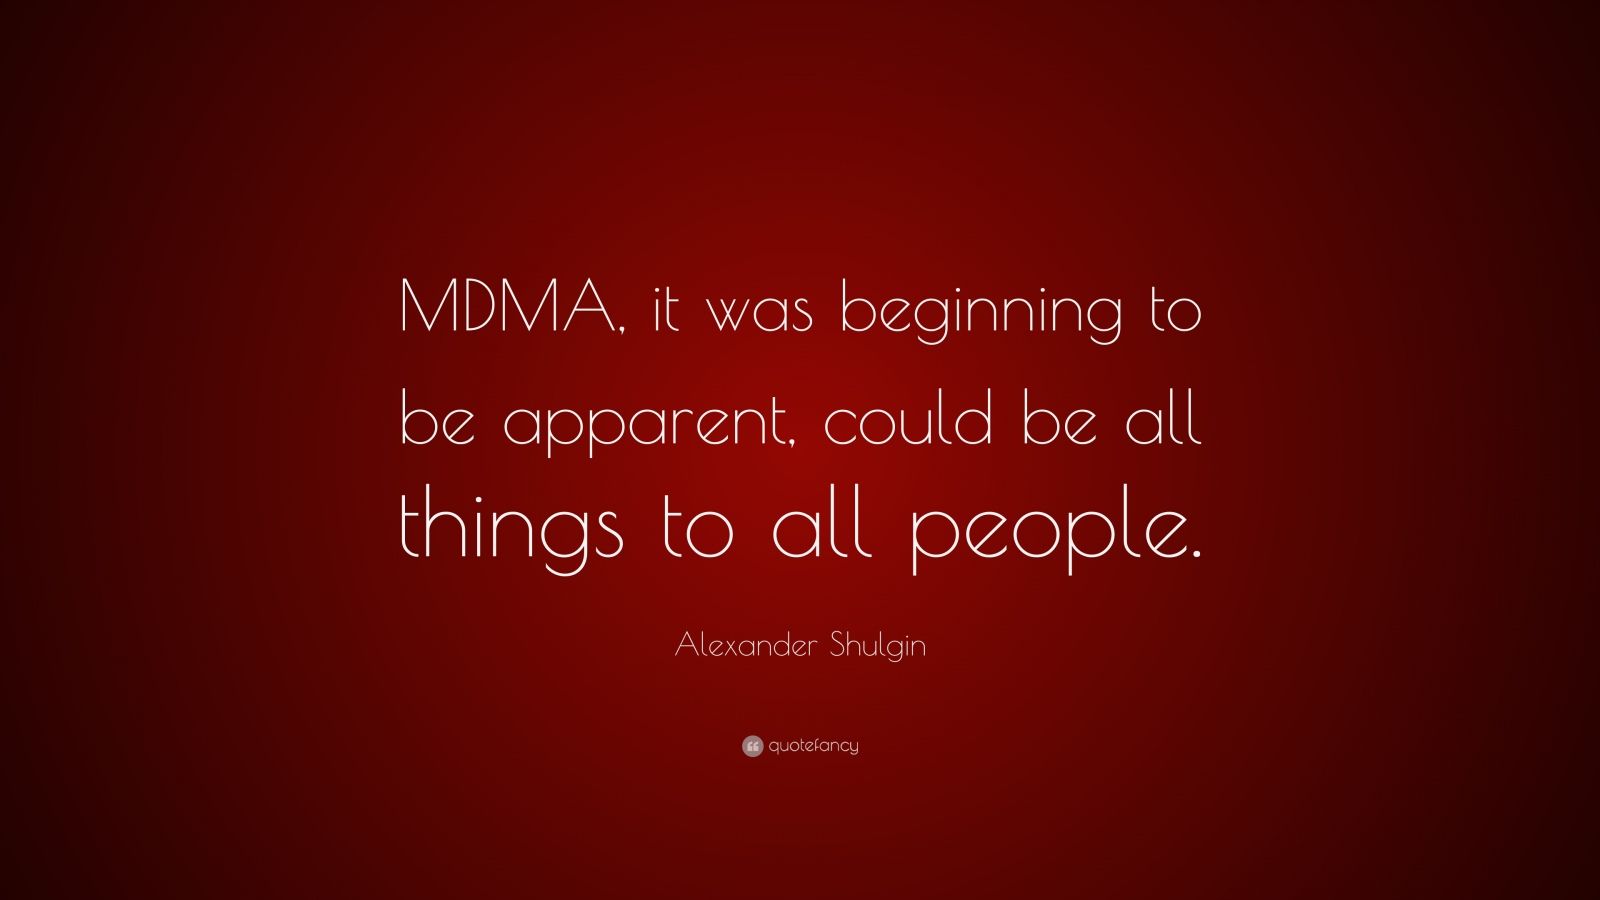 Alexander Shulgin Quote: “MDMA, it was beginning to be apparent